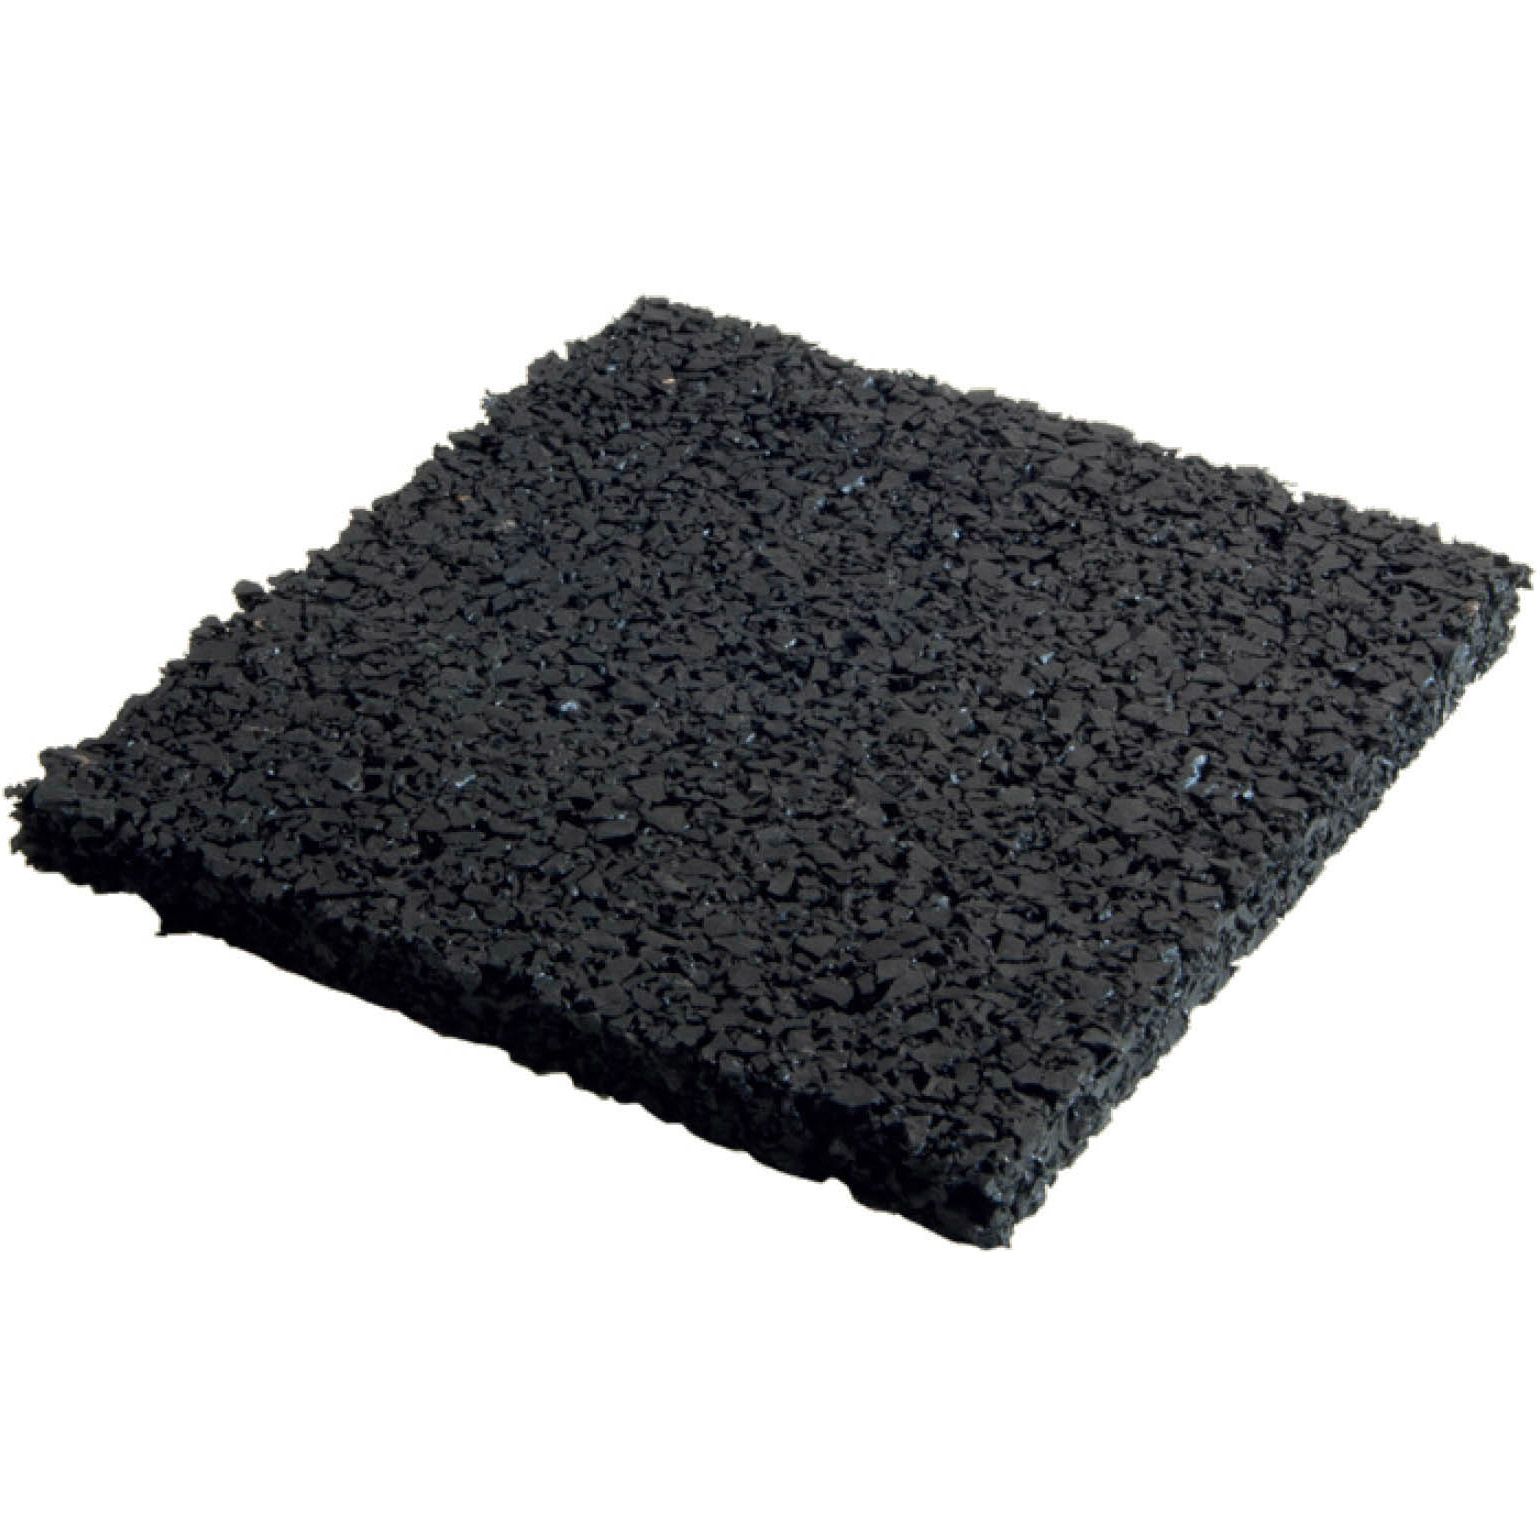 Blooma Rubber Deck joist pad (L)0.09m (W)90mm (T)8mm, Pack of 24